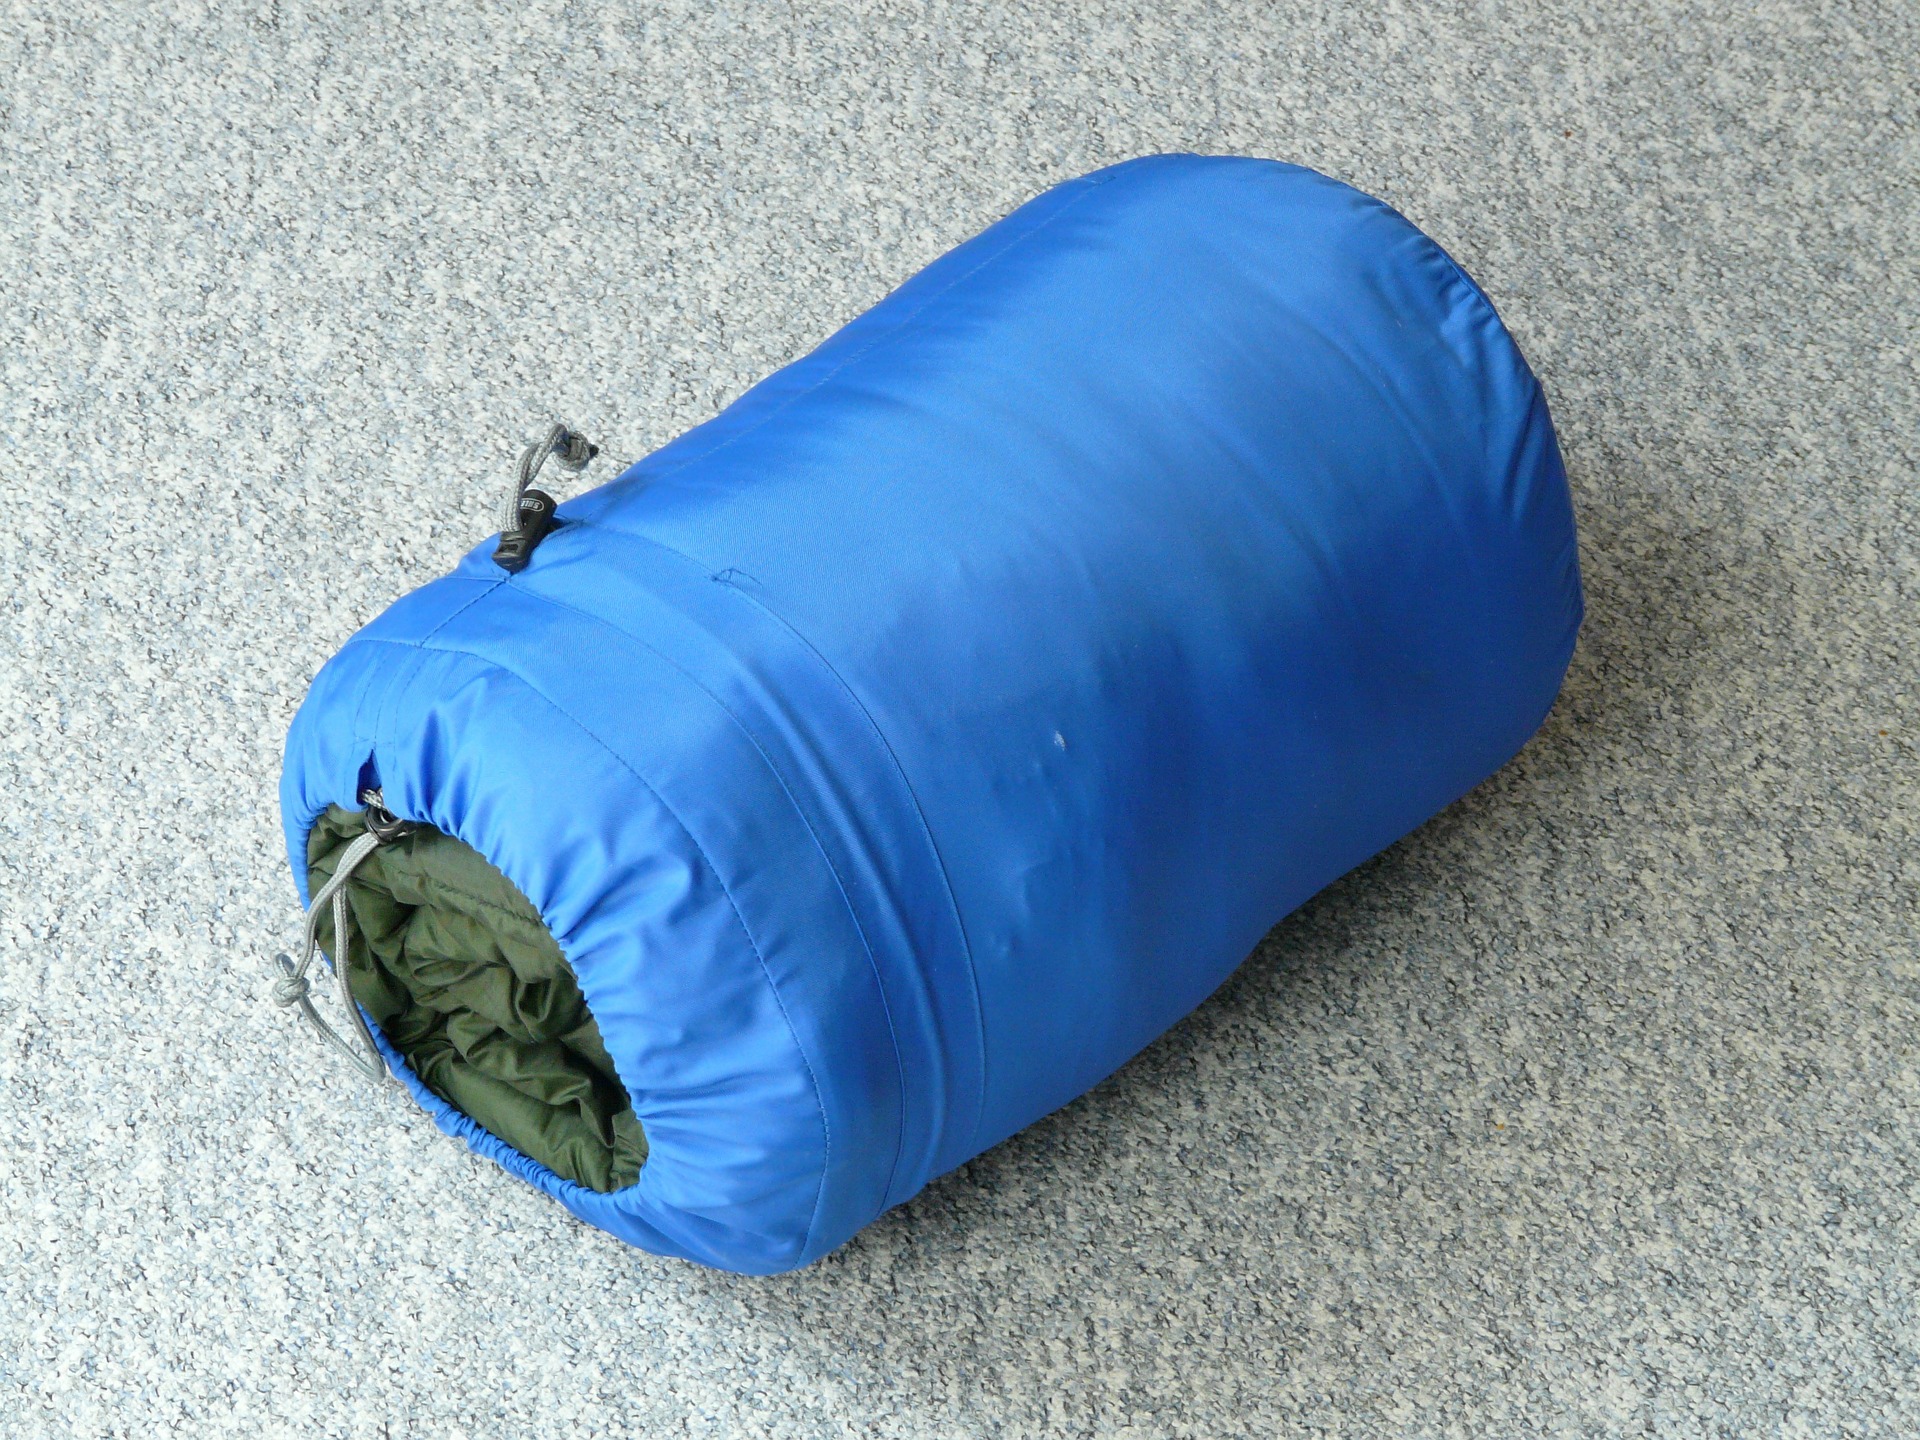 Solved How much does a sleeping bag cost? Let's say you want